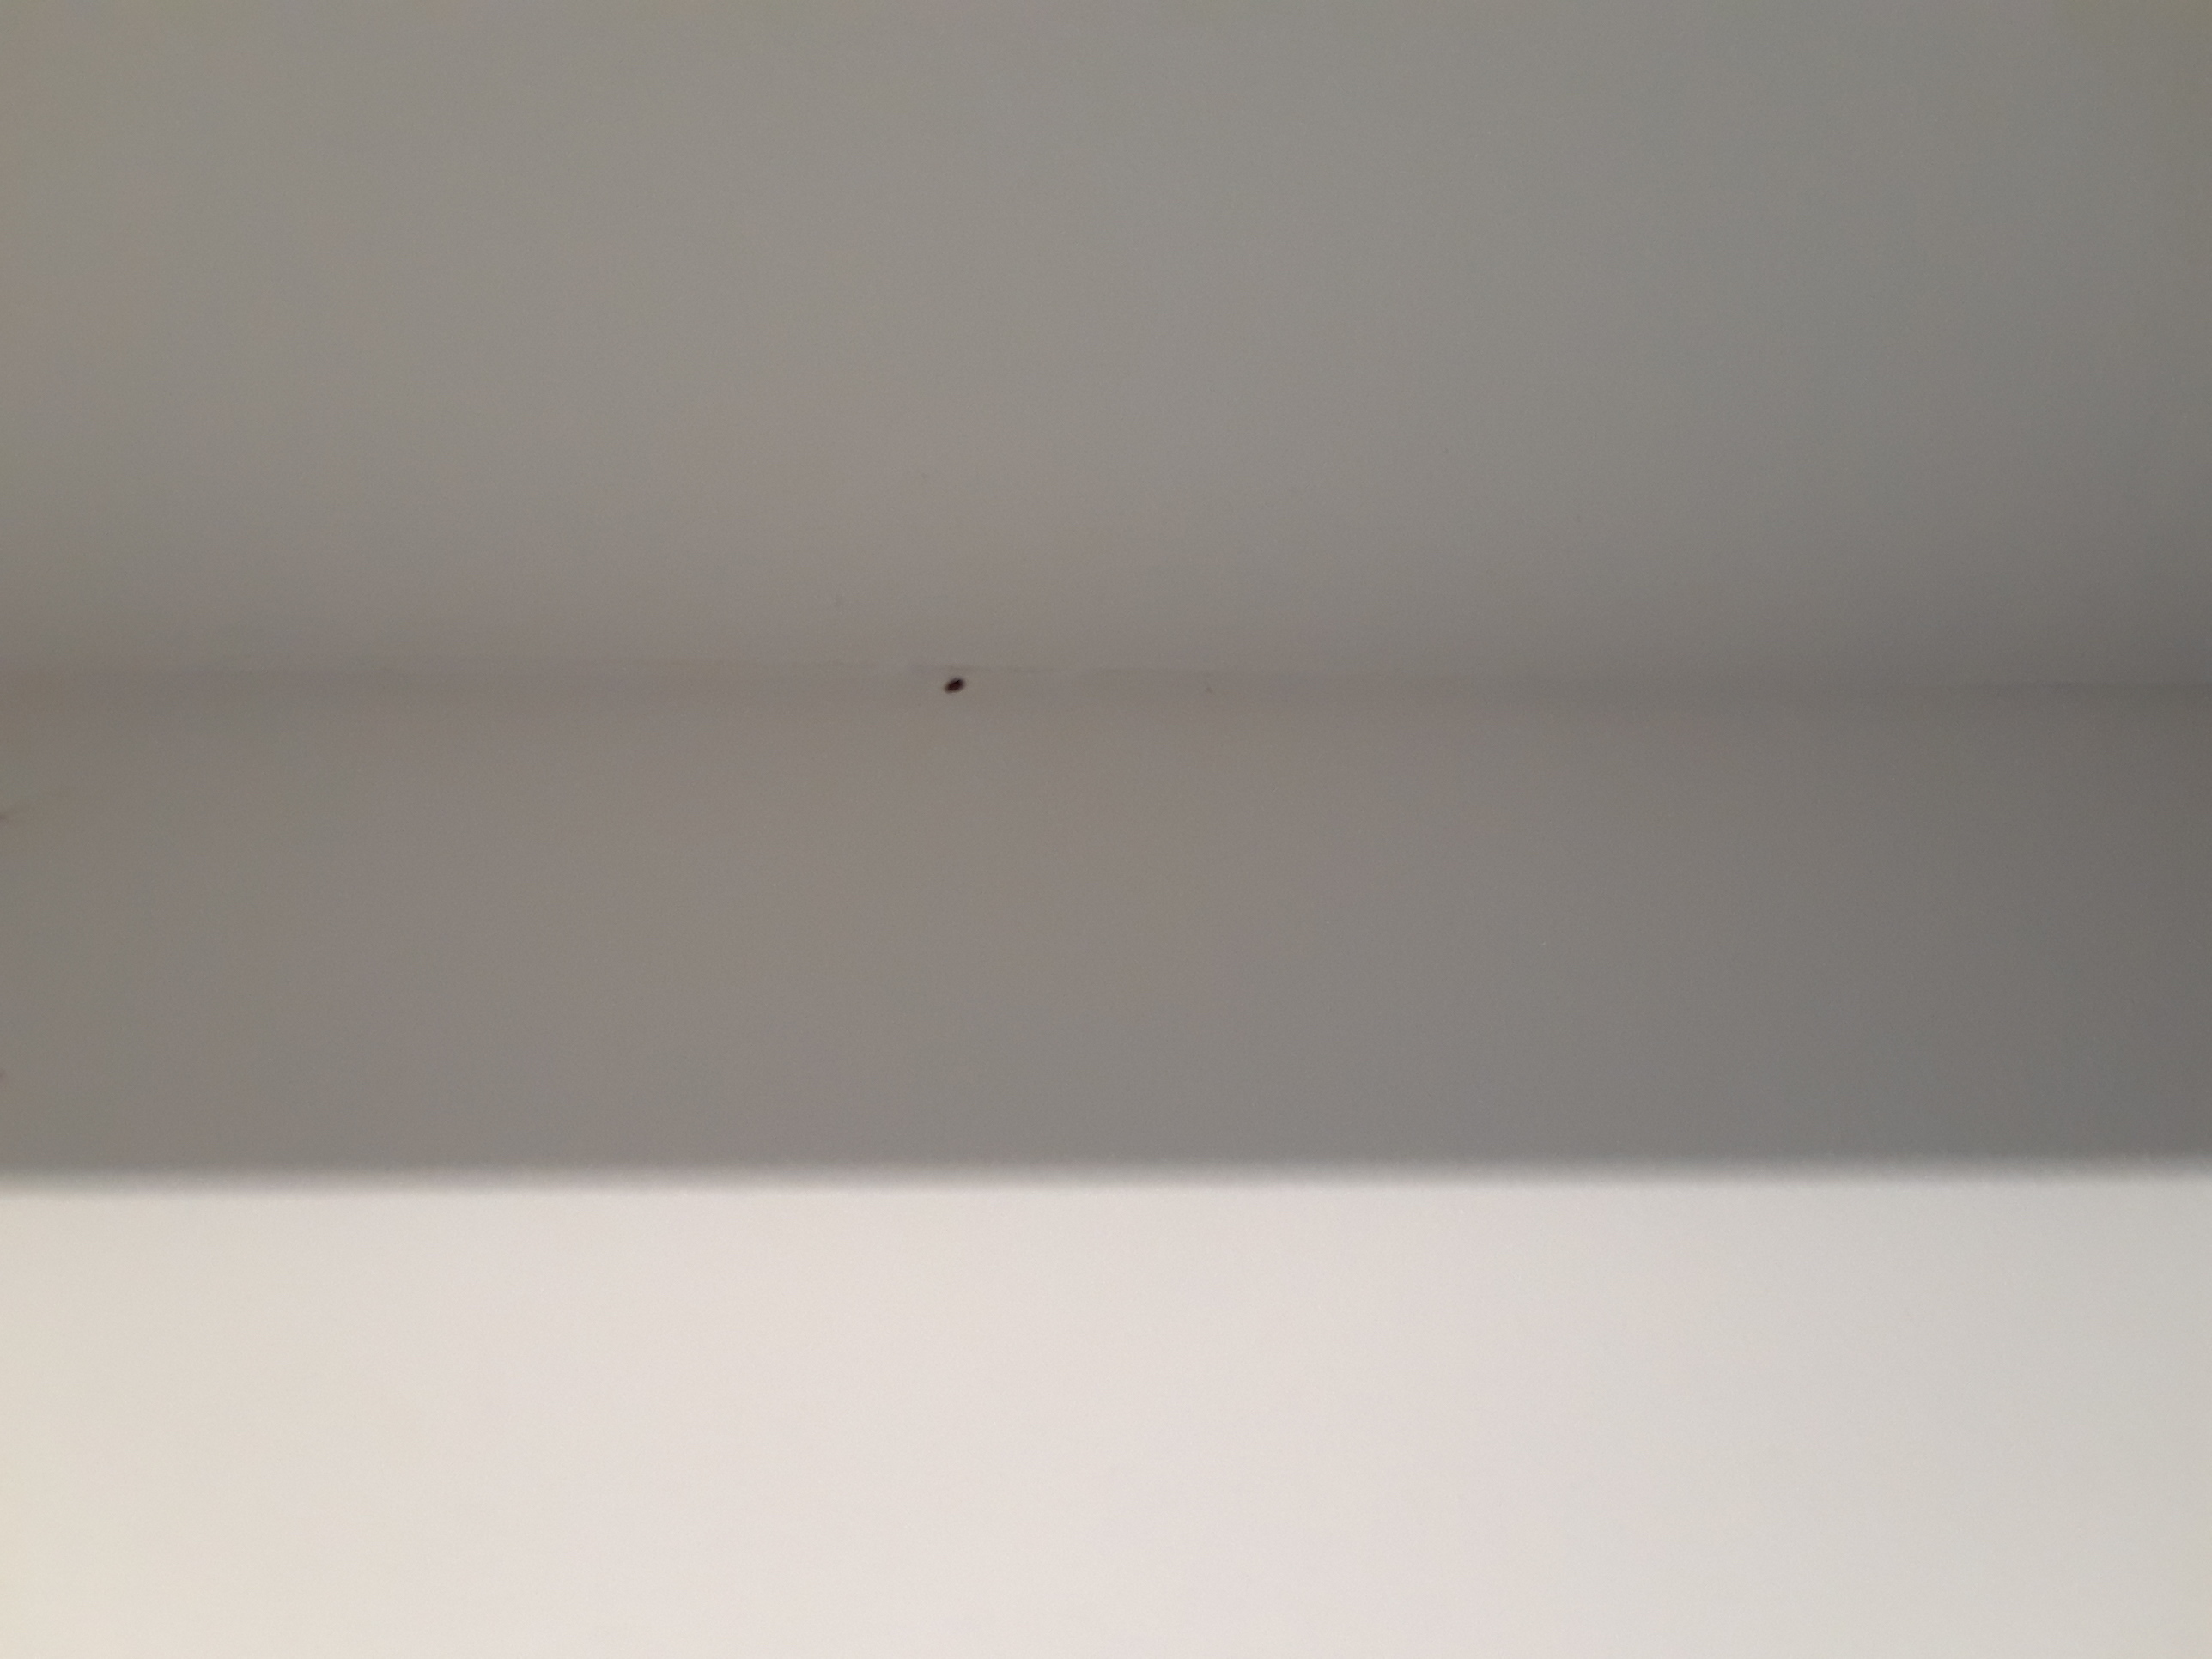 Bed bug easily seen on white wall